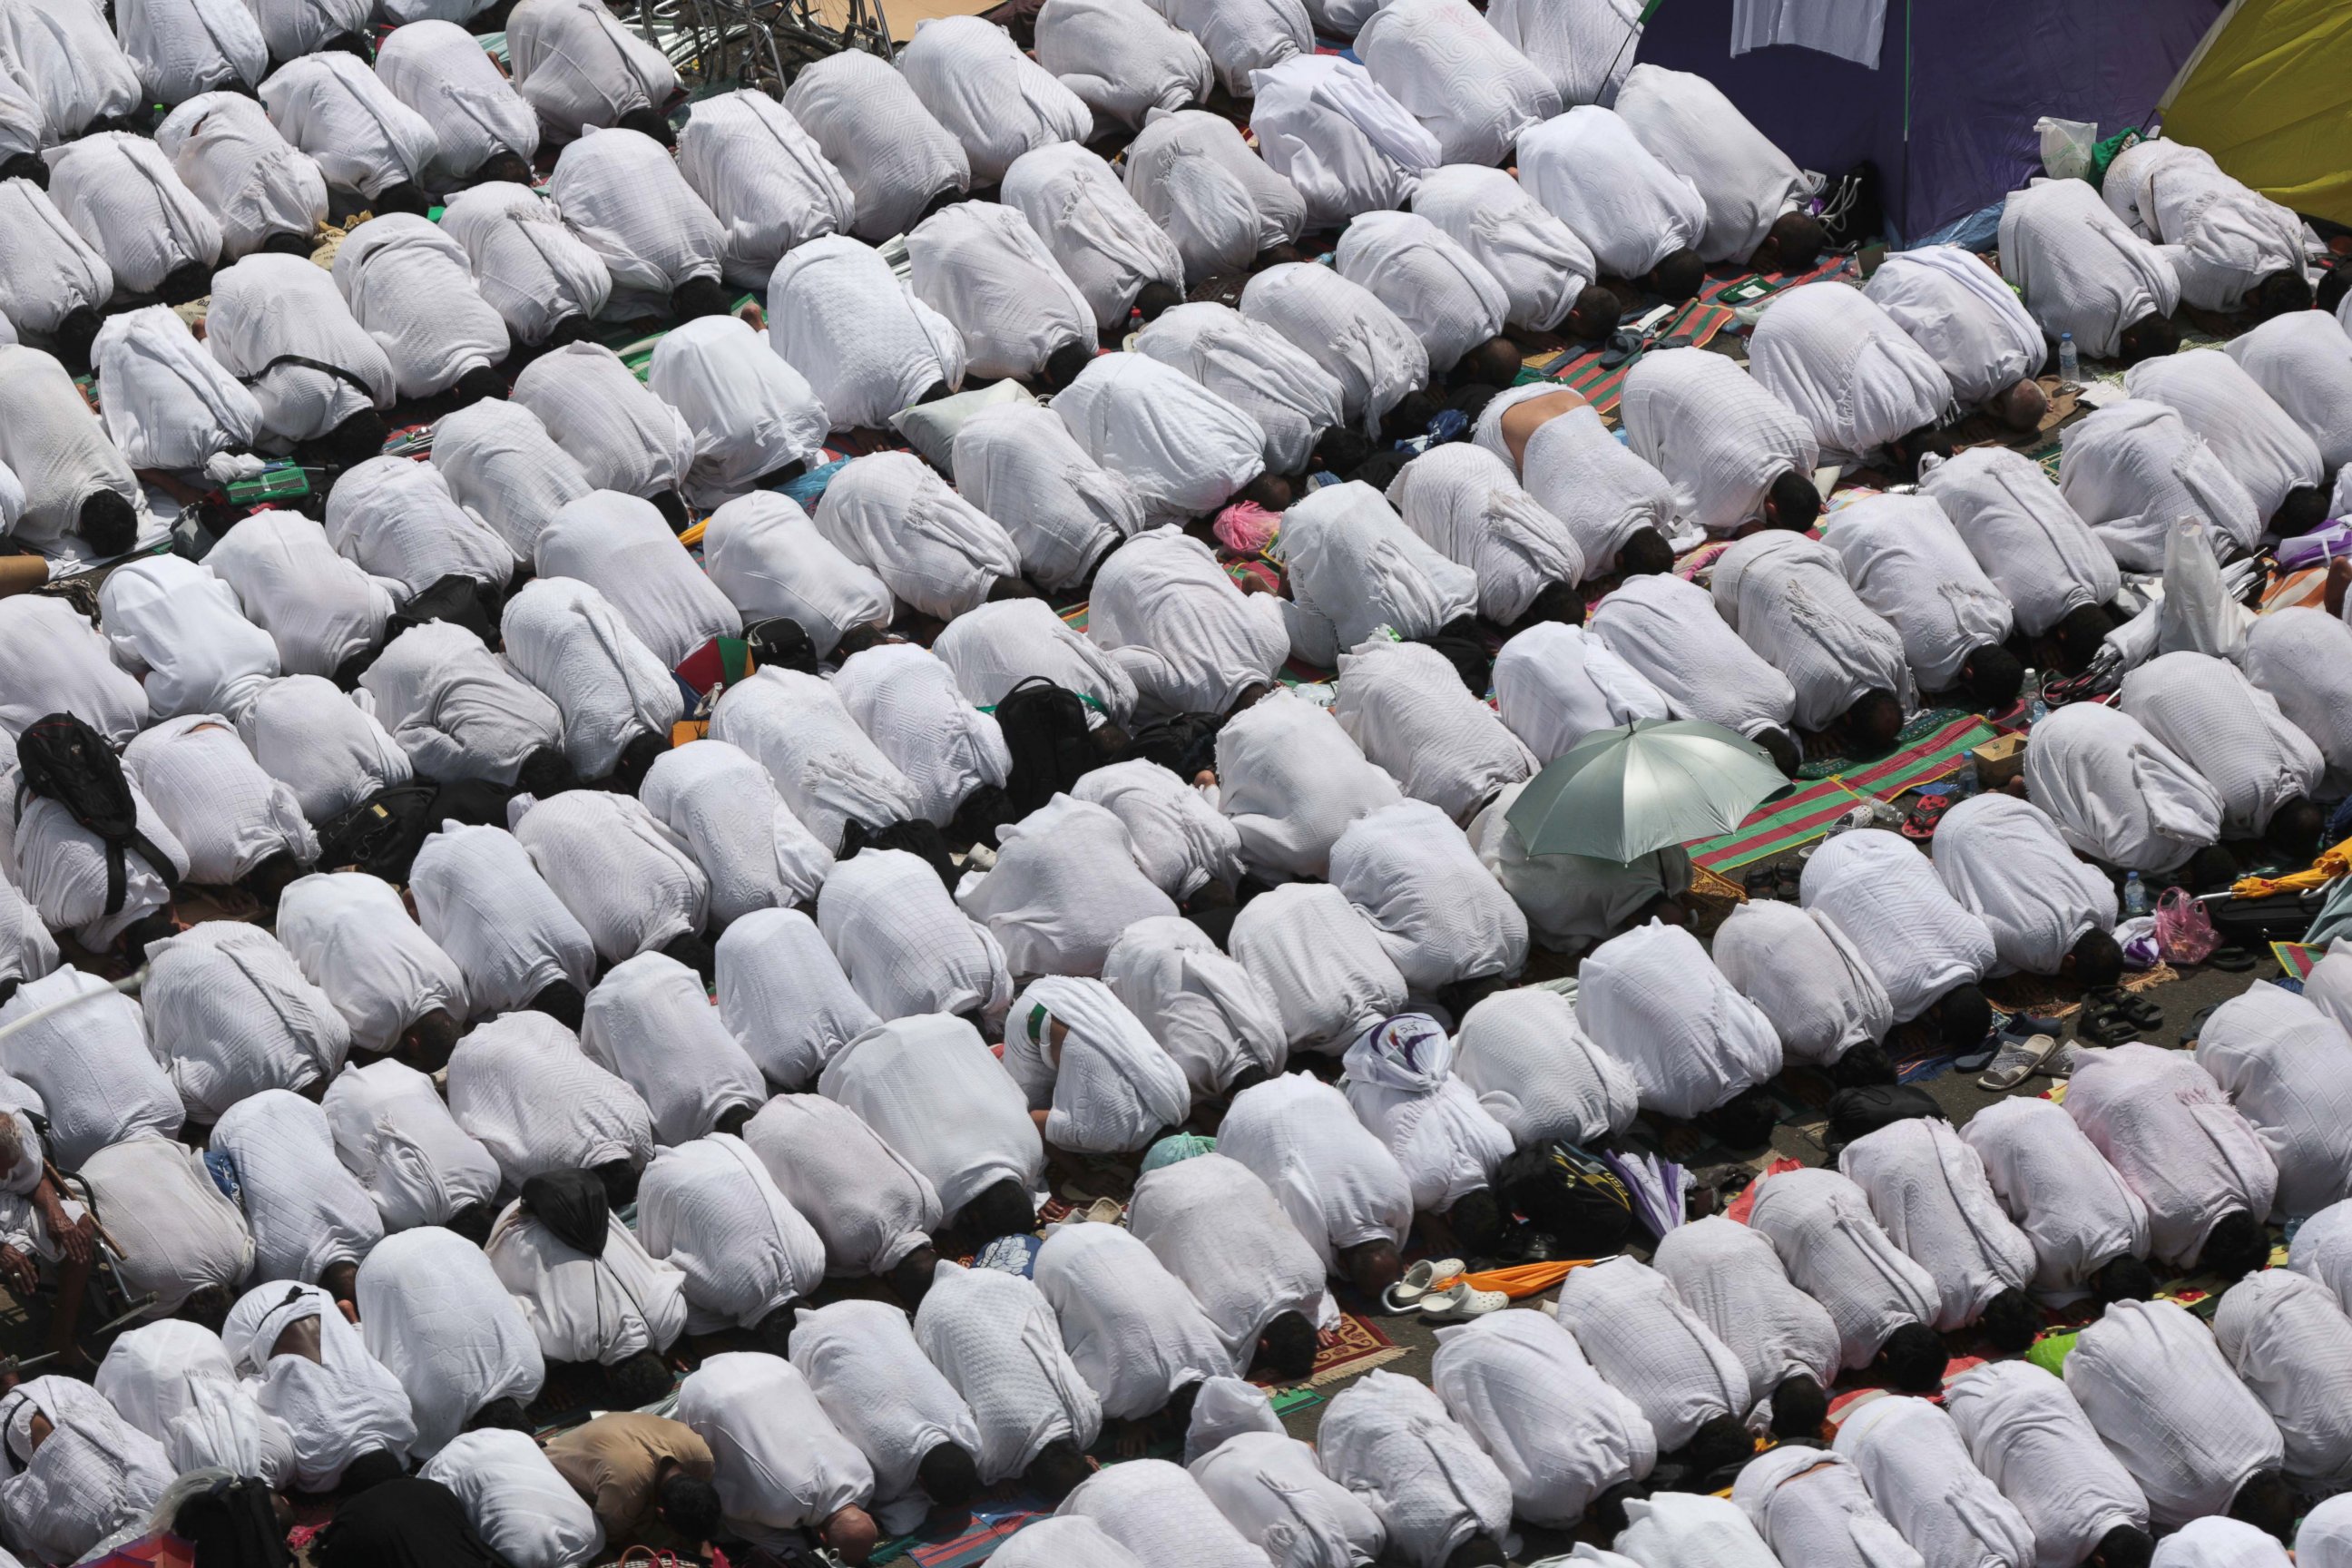 PHOTO:Muslim pilgrims pray outside Namira mosque in Arafat, on the second and most significant day of the annual hajj pilgrimage, near the holy city of Mecca, Saudi Arabia, Sept. 23, 2015.   